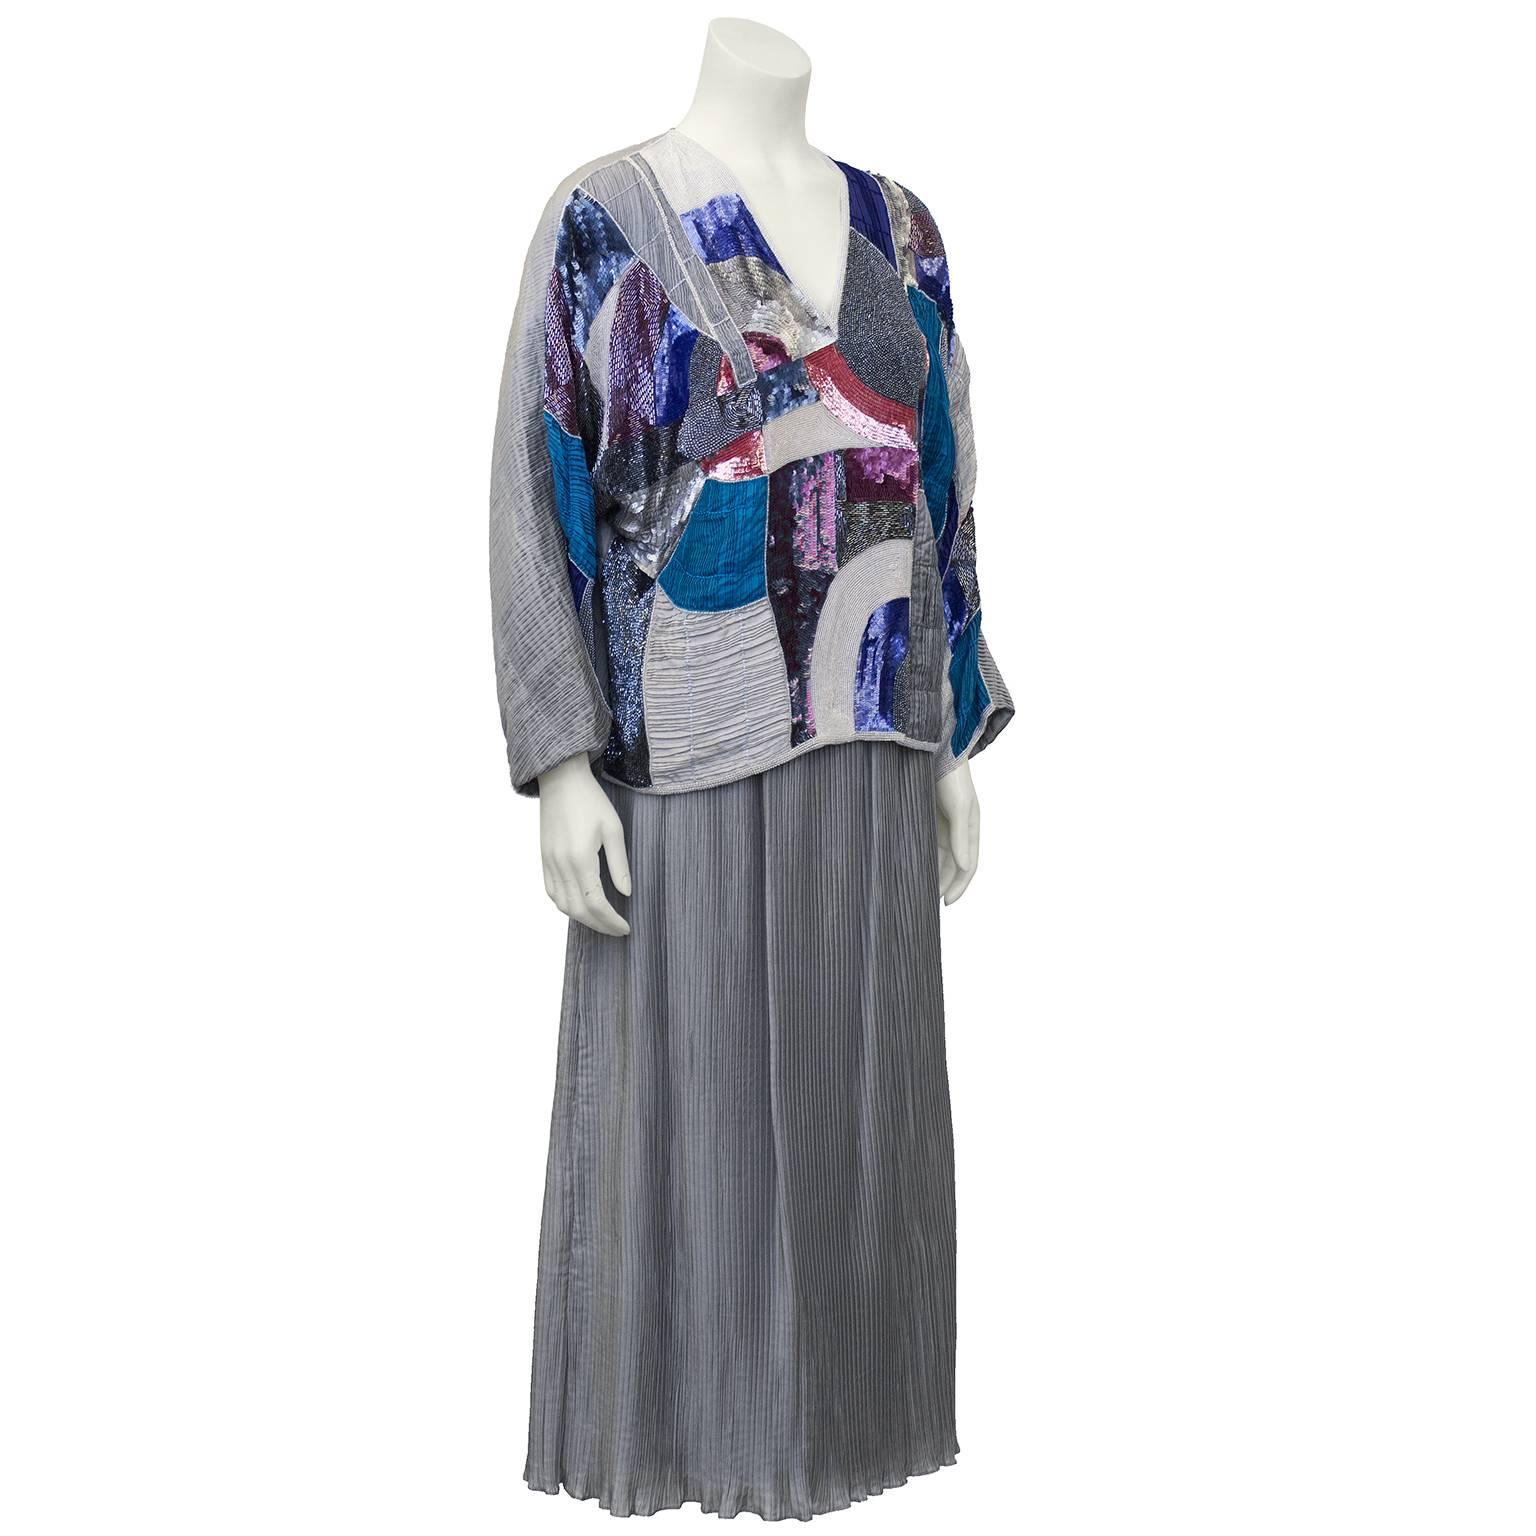 1980's Italian evening set with multi colored sequin and beaded top and micro pleated silver mid calf skirt. Inspired by Mary McFadden from her Fortuny era pleated gown. The ideal way to dress for evening, the beaded top can be worn over a pair of